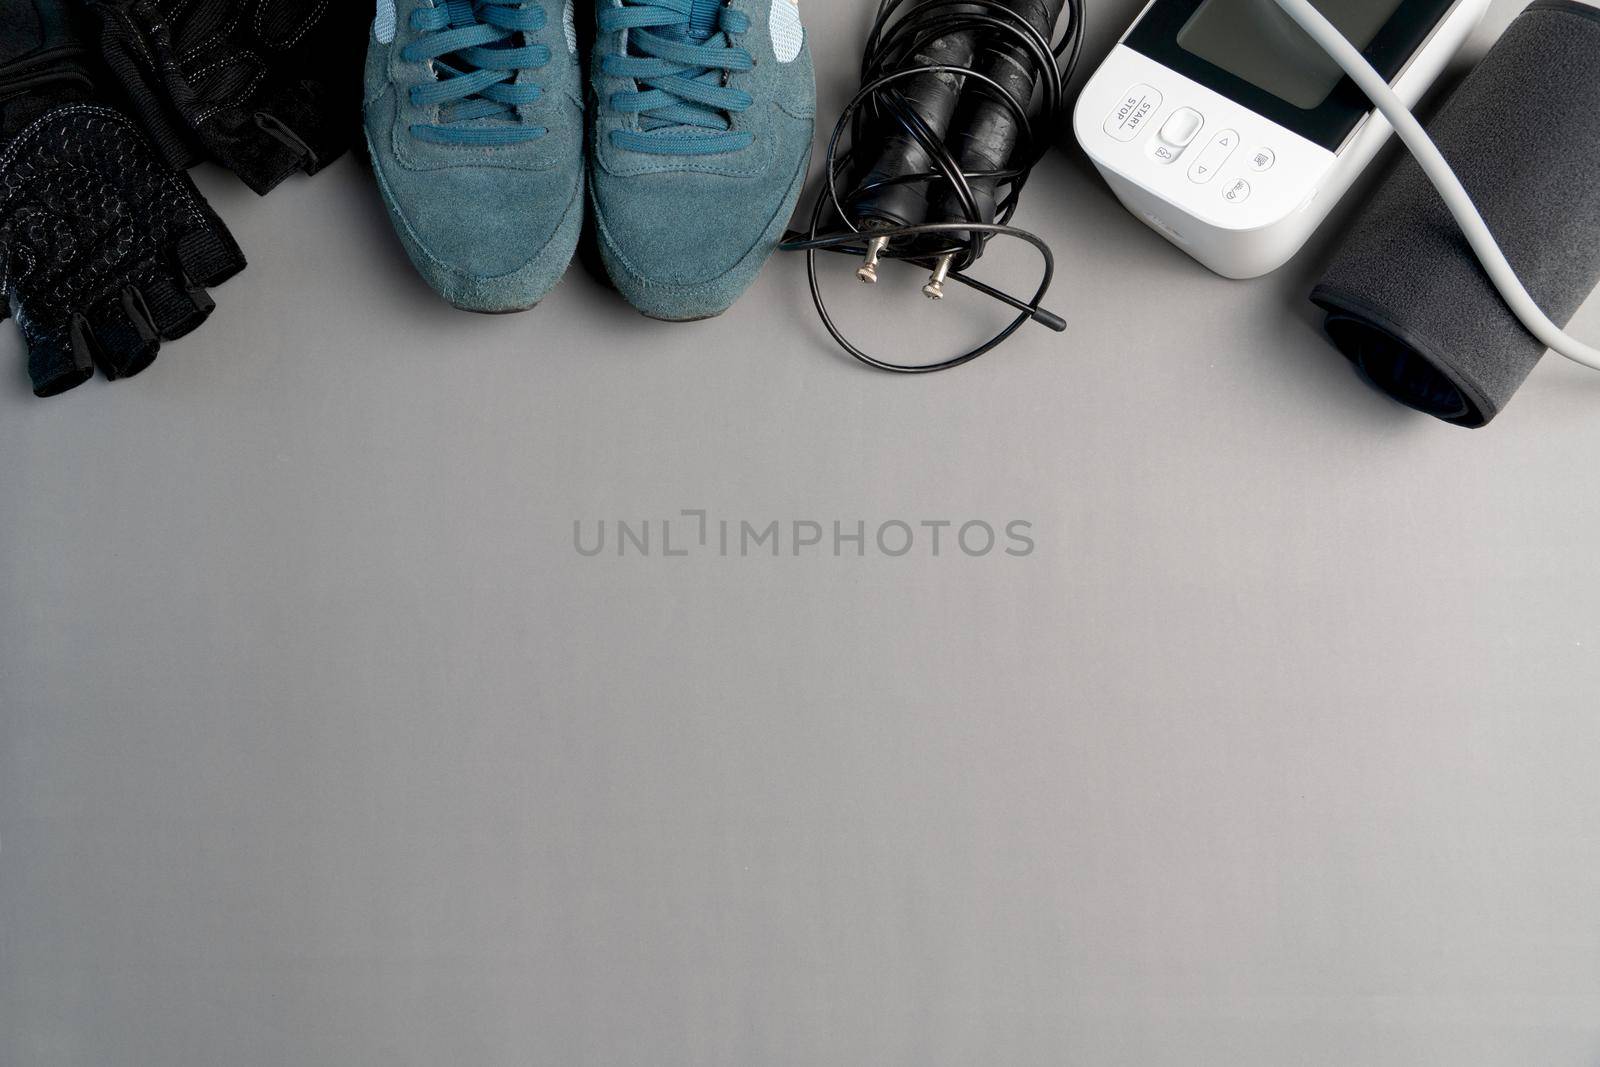 Healthy lifestyle. Jump rope  equipment and sphygmomanometer on a grey background. Top view with copy space.